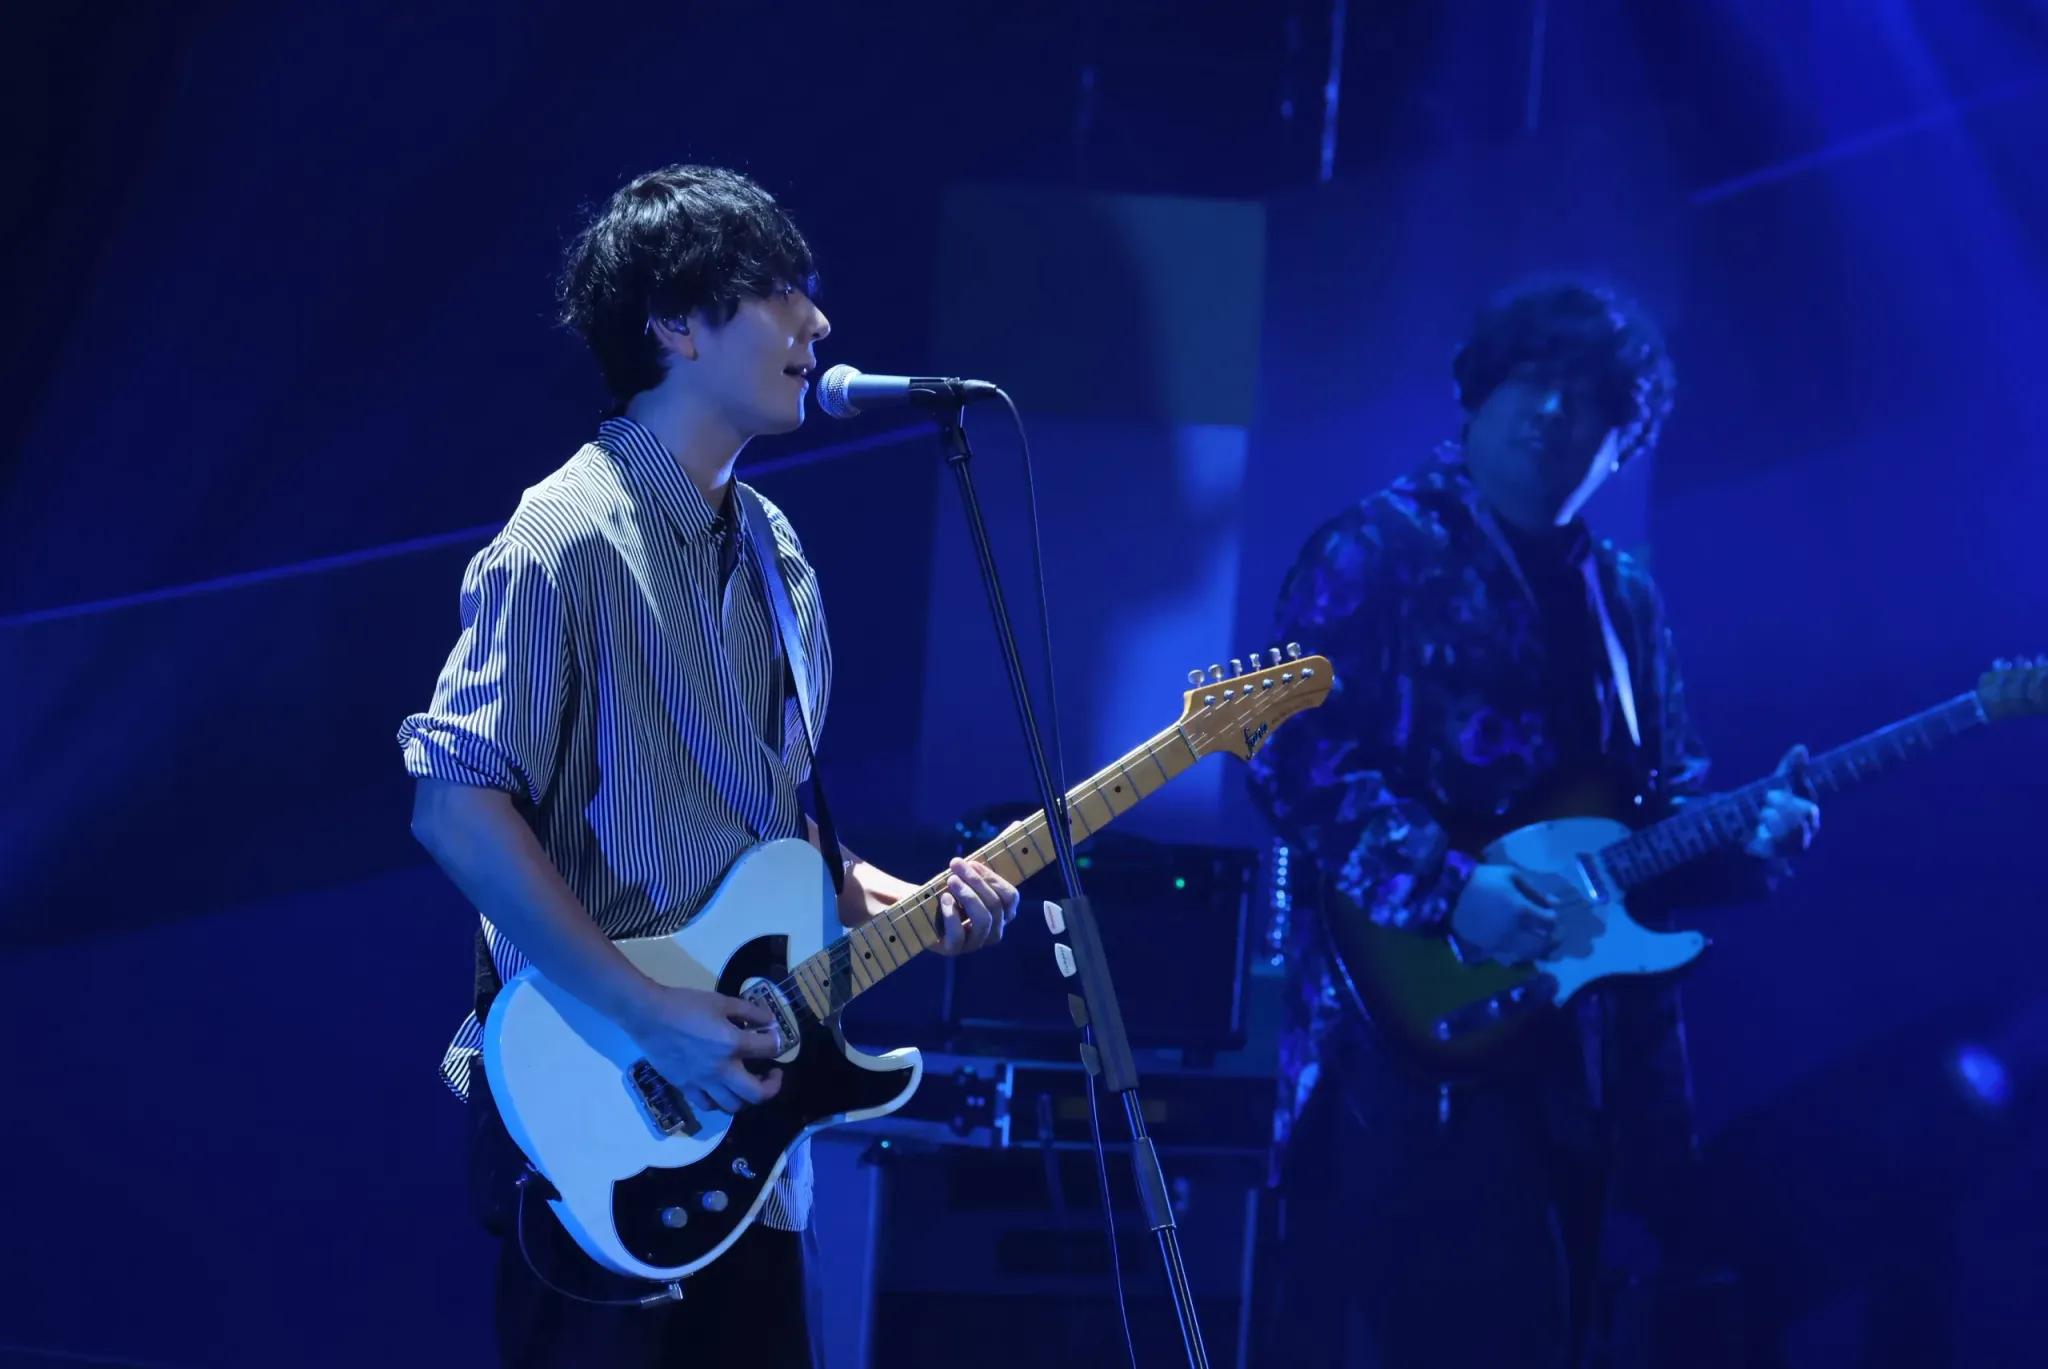 flumpool、GENERATIONS from EXILE TRIBE、内田雄馬が異色コラボ！「めざましテレビ30周年フェス」札幌公演レポート_bodies